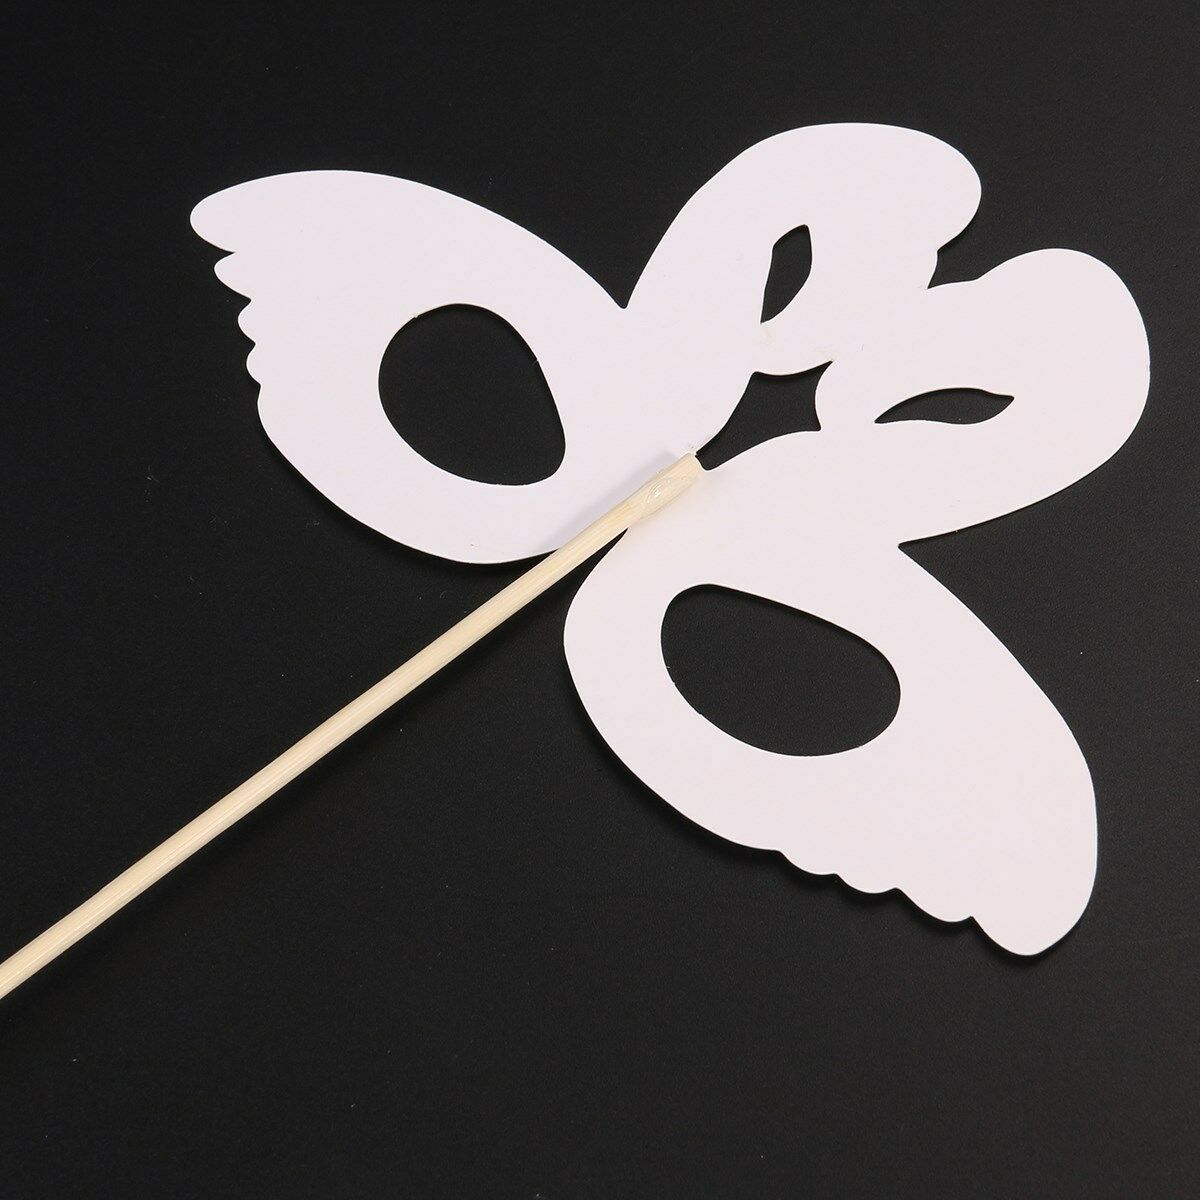 21pcs Themed Summer Party wedding Photo Booth Props Kit Party wedding Flamingo